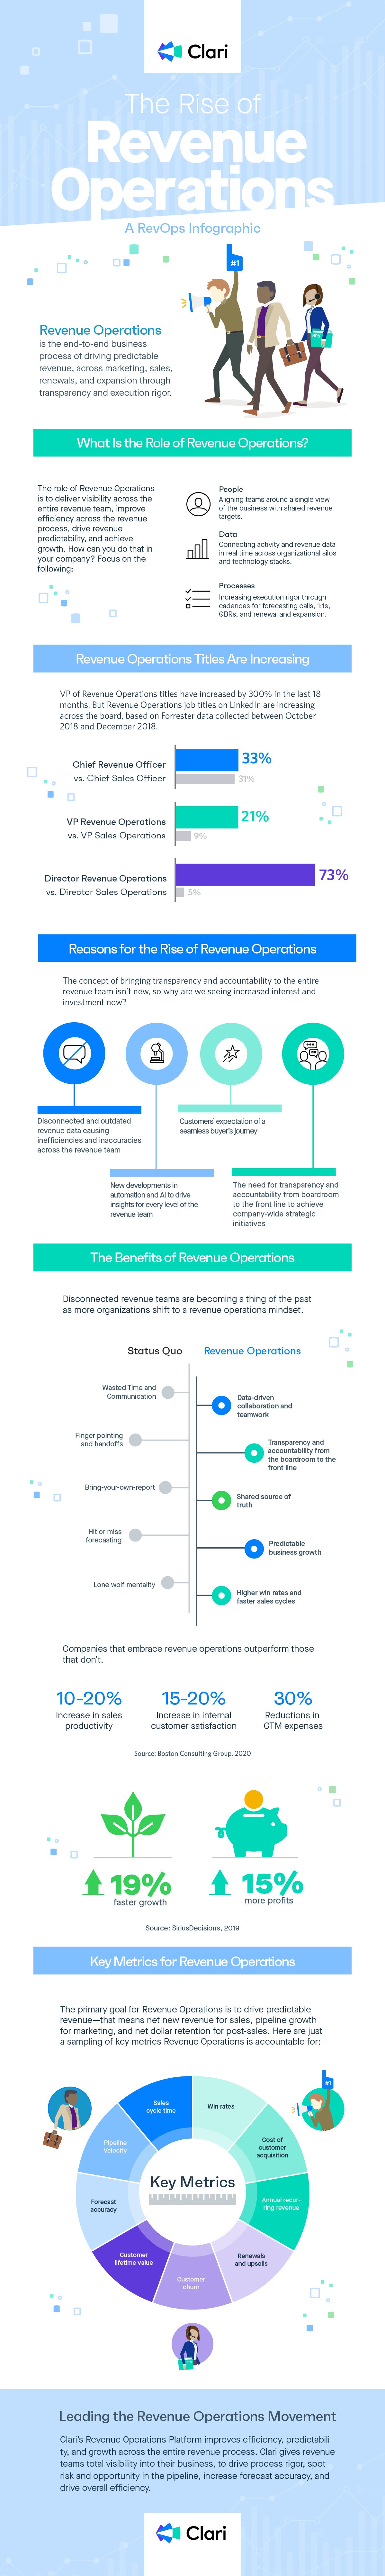 Revenue Operations Infographic by Clari